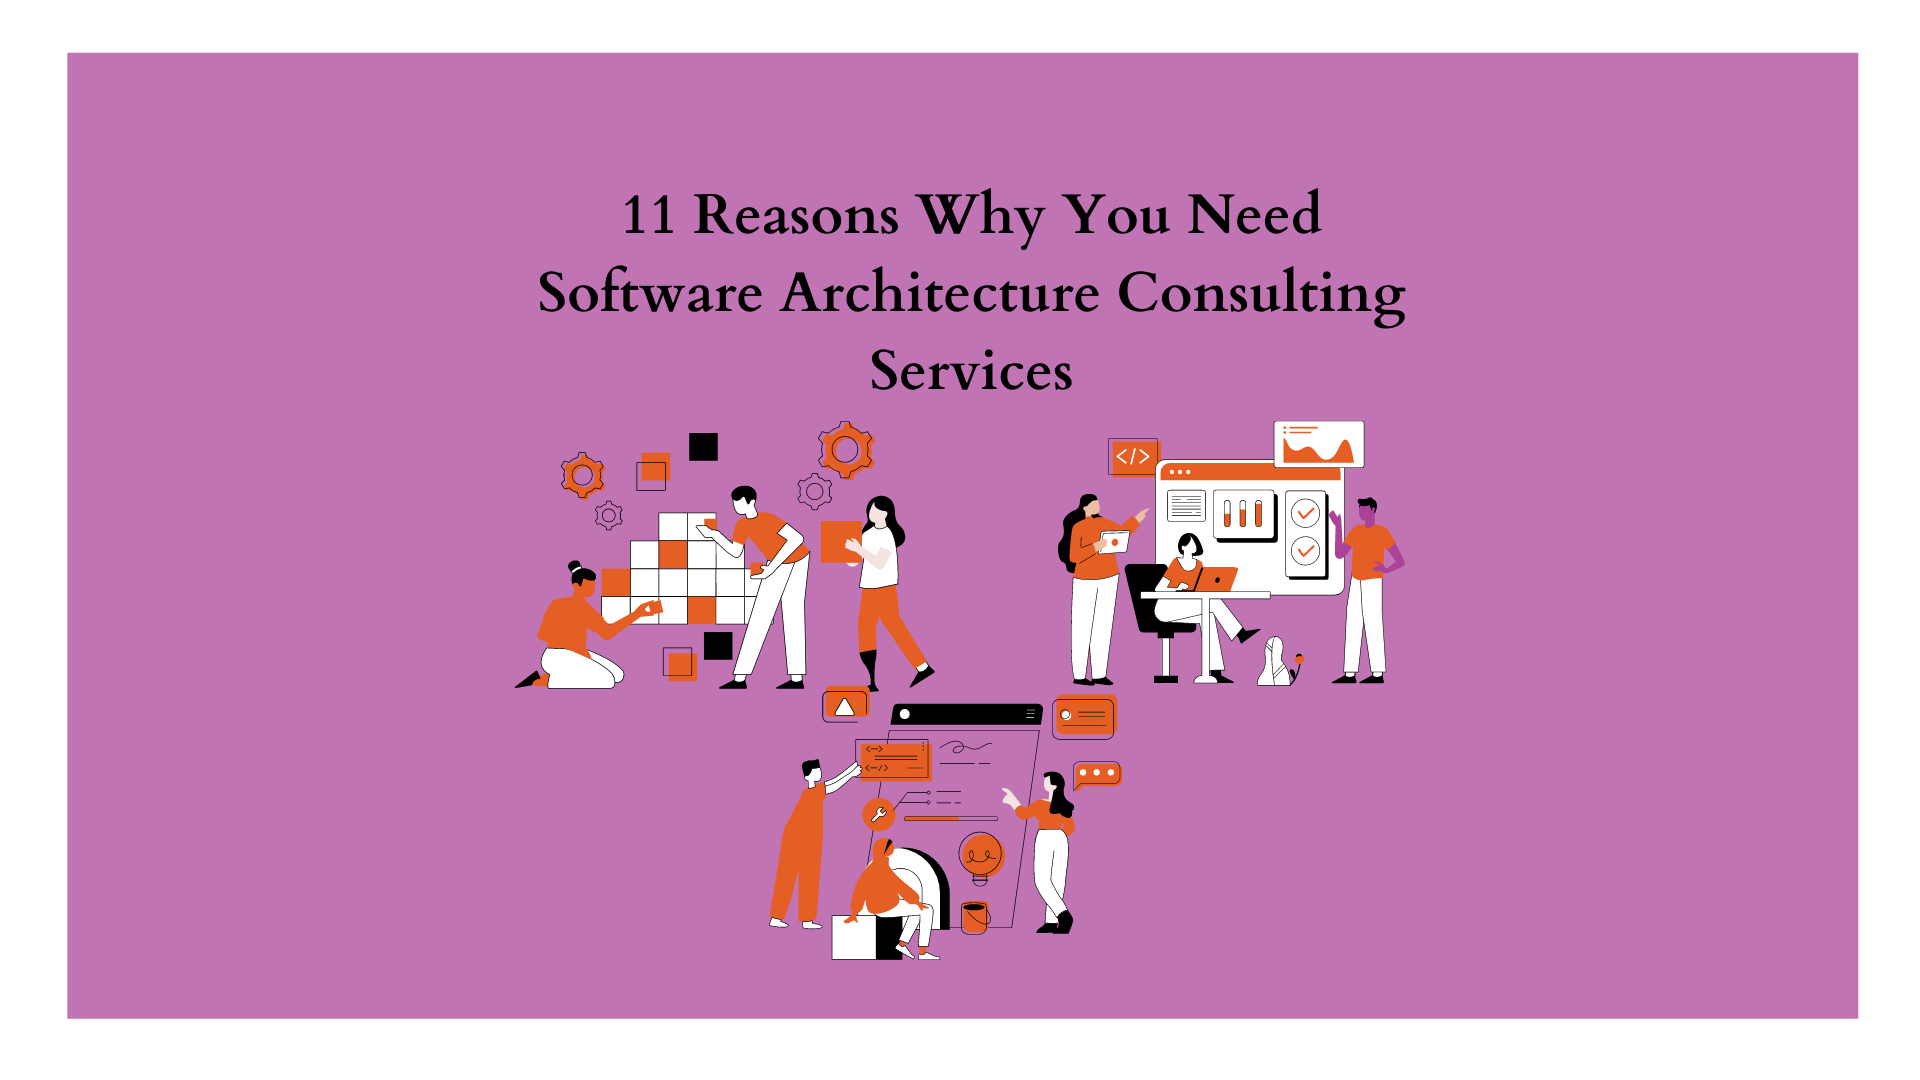 11 Reasons Why You Need Software Architecture Consulting Services